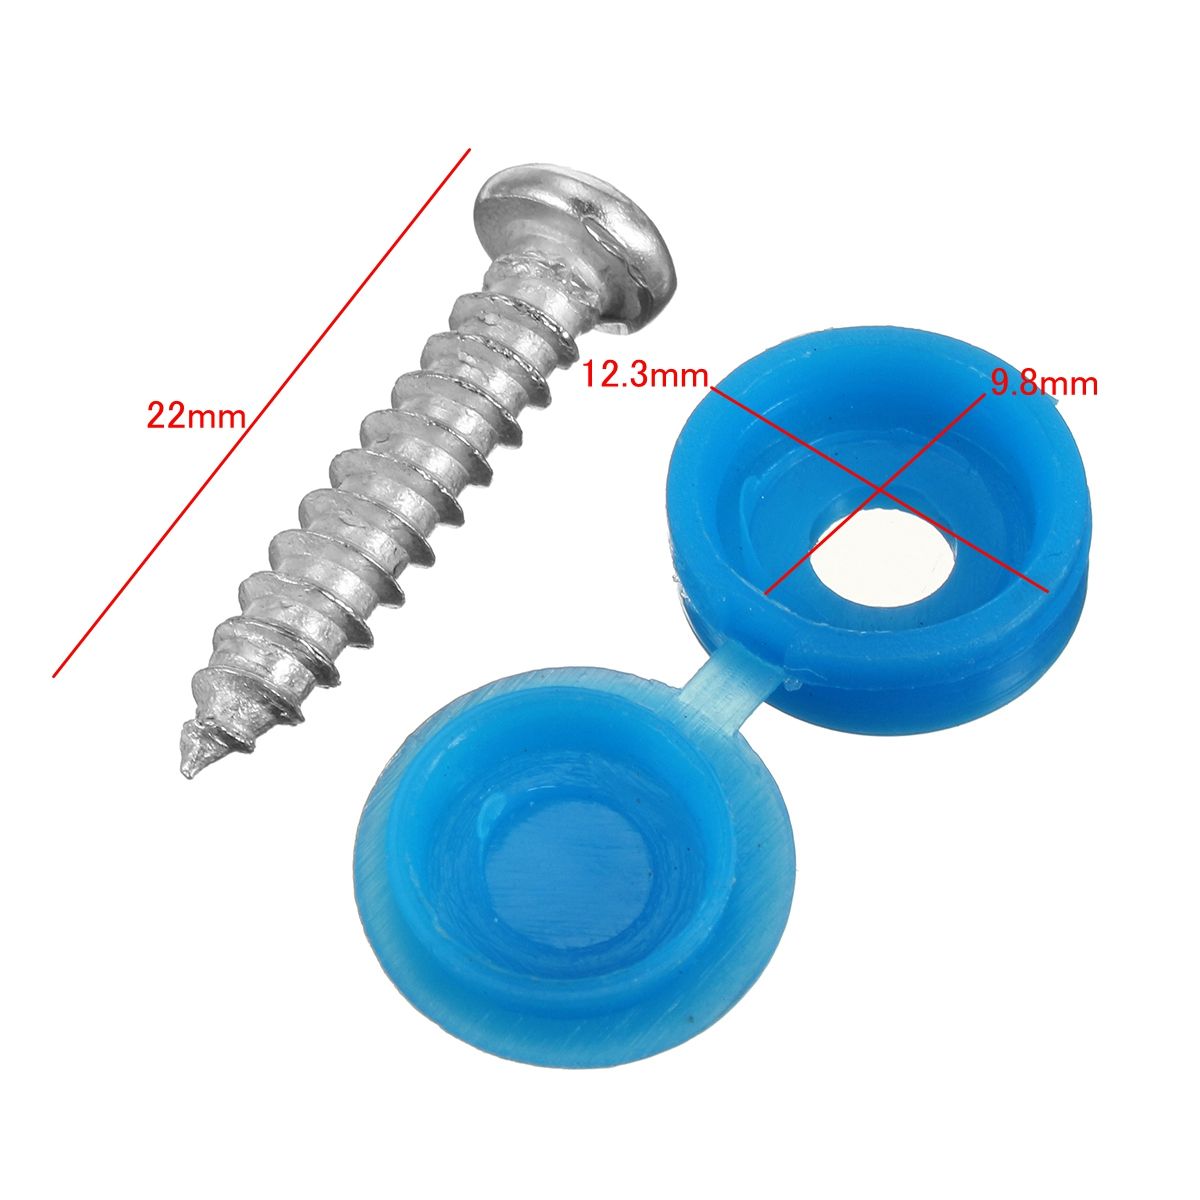 16Pcs-Licence-Number-Plate-Phillips-Self-Tapping-Screw-with-Hinged-Blue-Cover-Caps-1200608